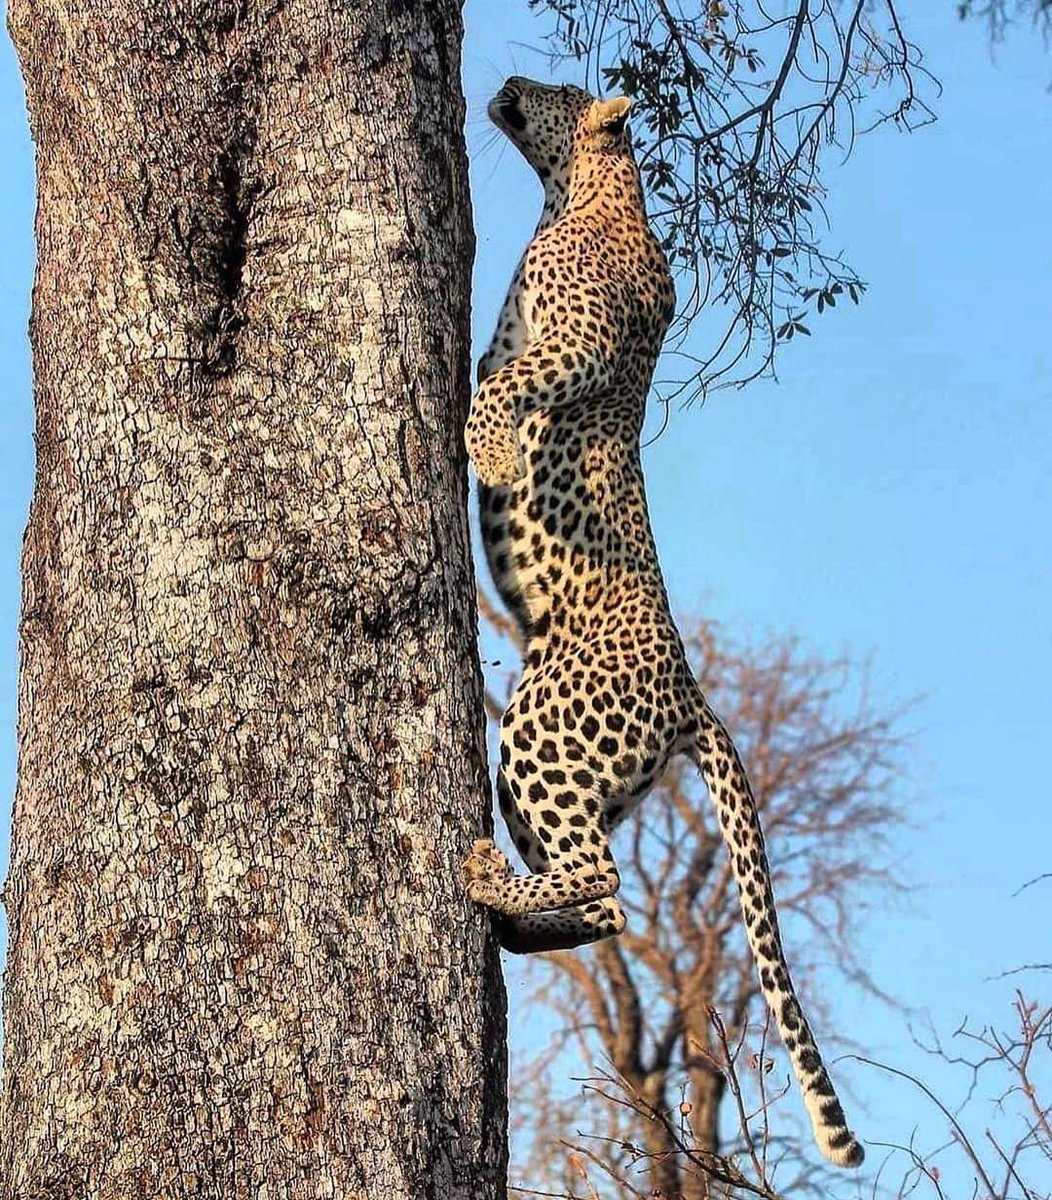 Spotted Beauty Defies Gravity like a Boss!😍
Stunning capture by #wildographer, conservation pilot & super guide @liamburr_wildlife 

#Wildography #leopard #liamburr_wildlife #liamburrough #wildographyandsafaris